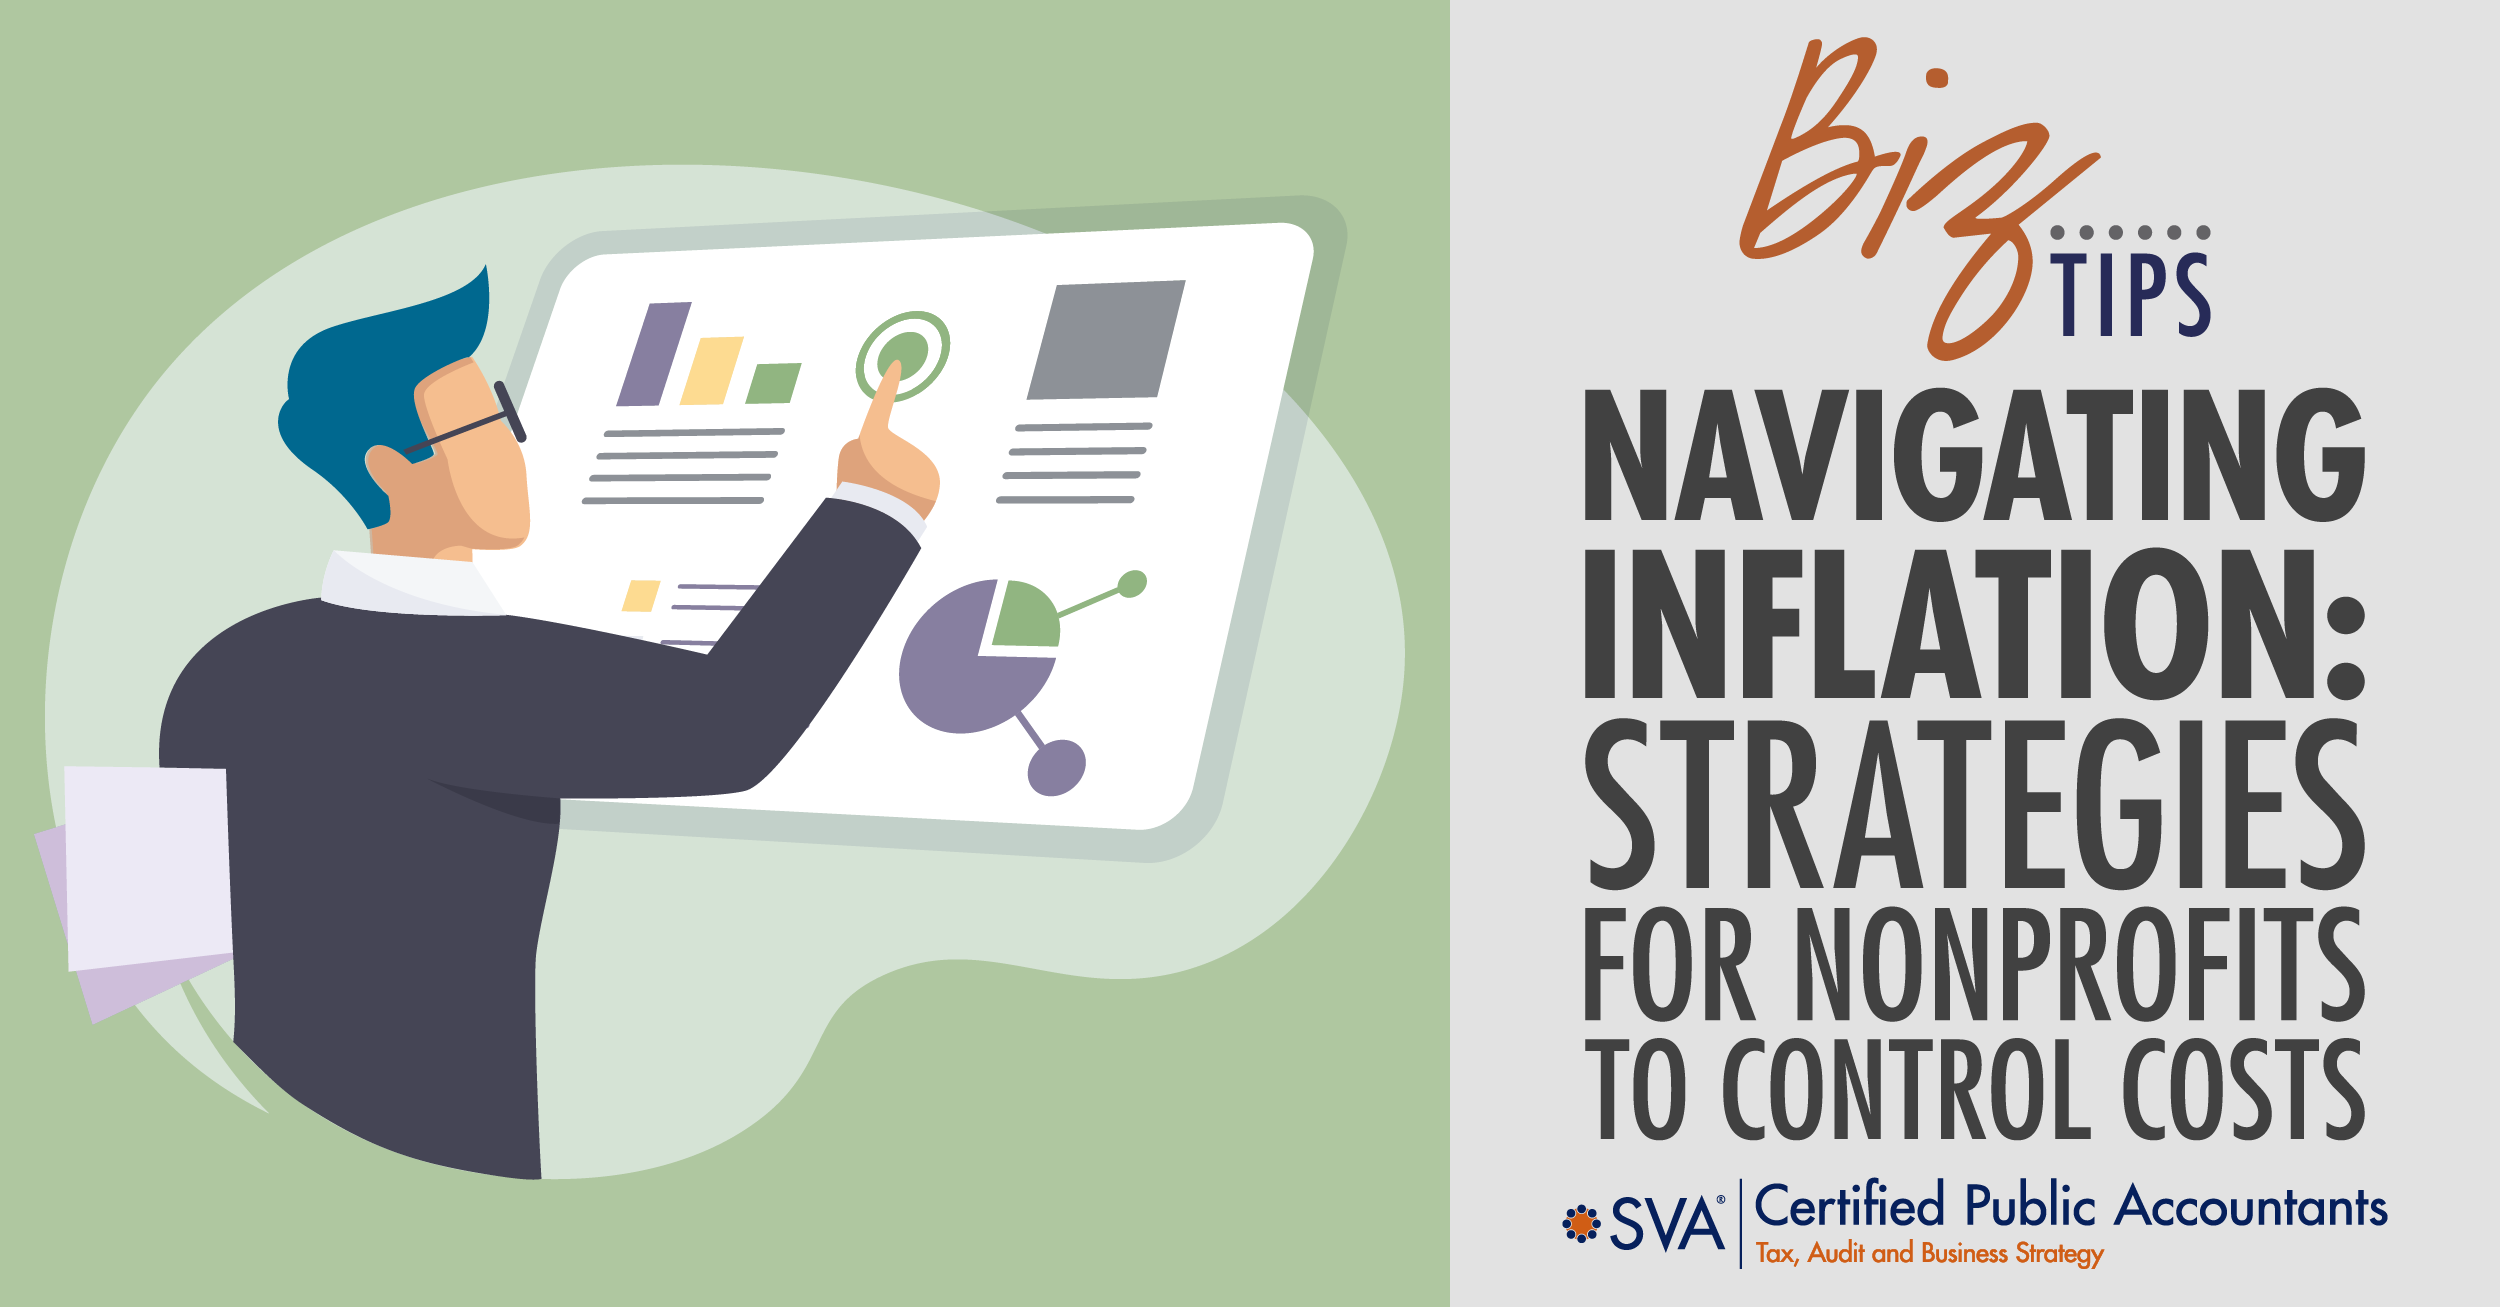 Navigating Inflation: Strategies for Nonprofits to Control Costs